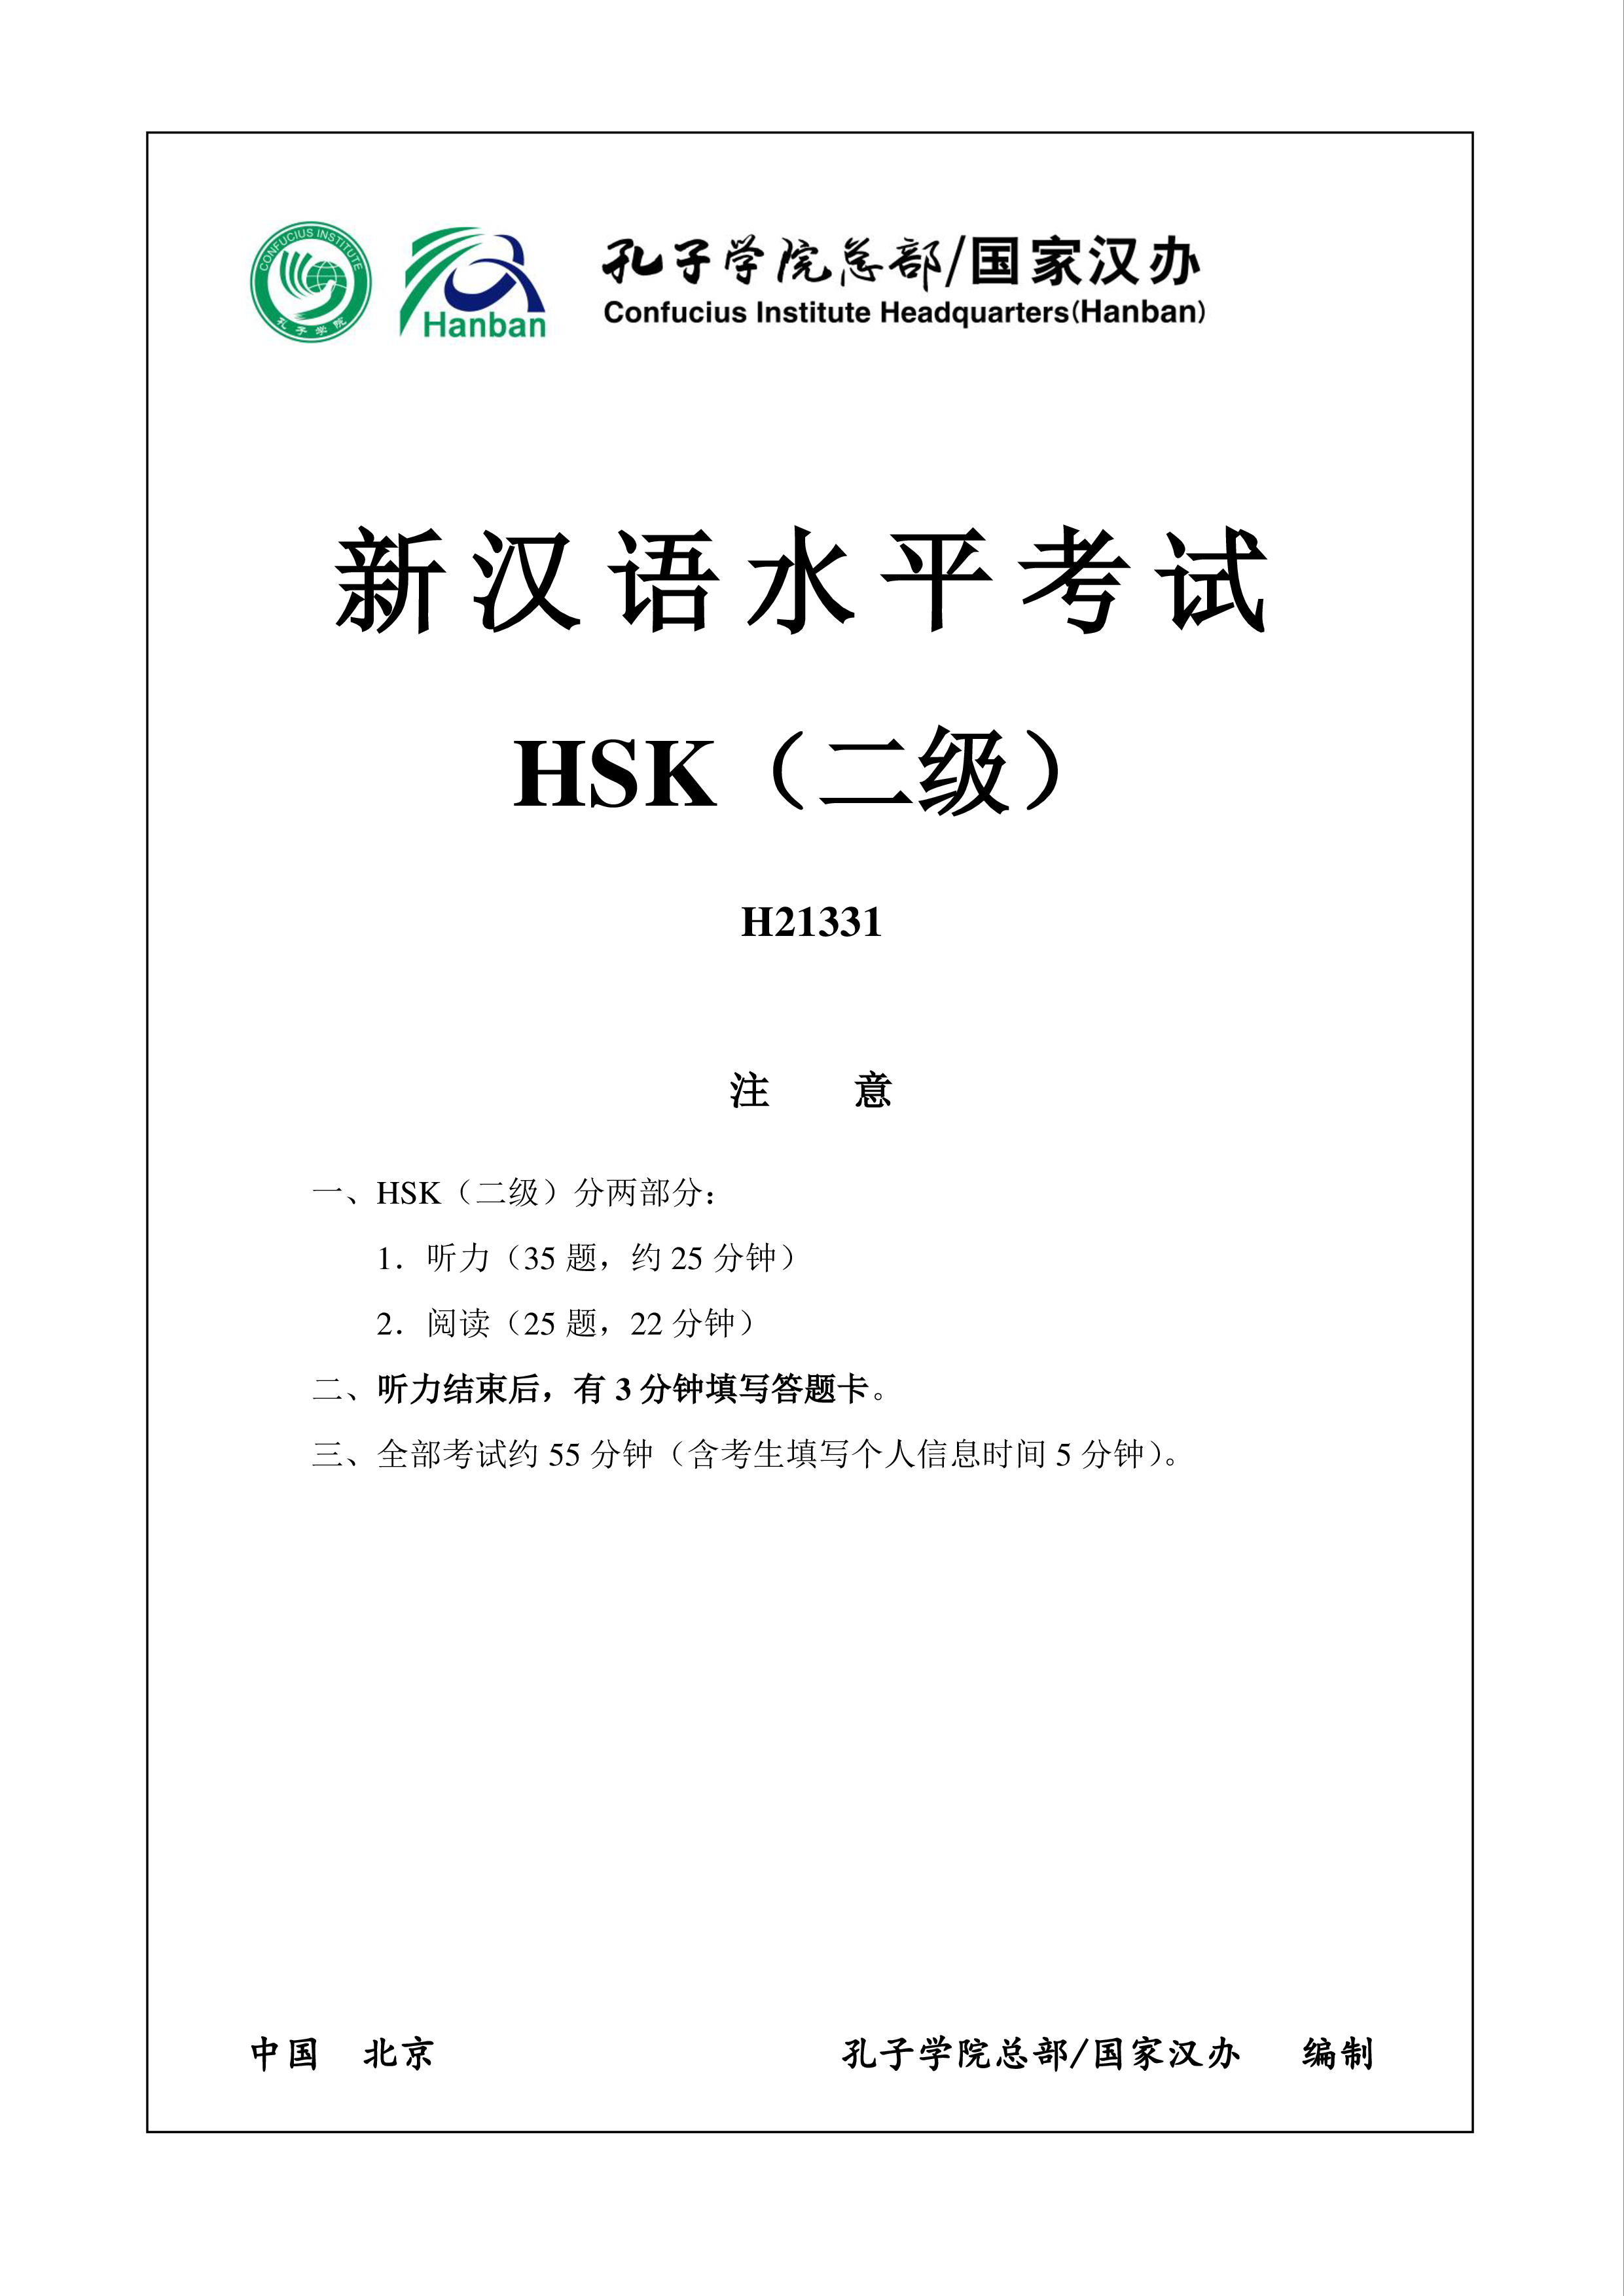 hsk2 chinese exam including answers # hsk2 h21331 voorbeeld afbeelding 